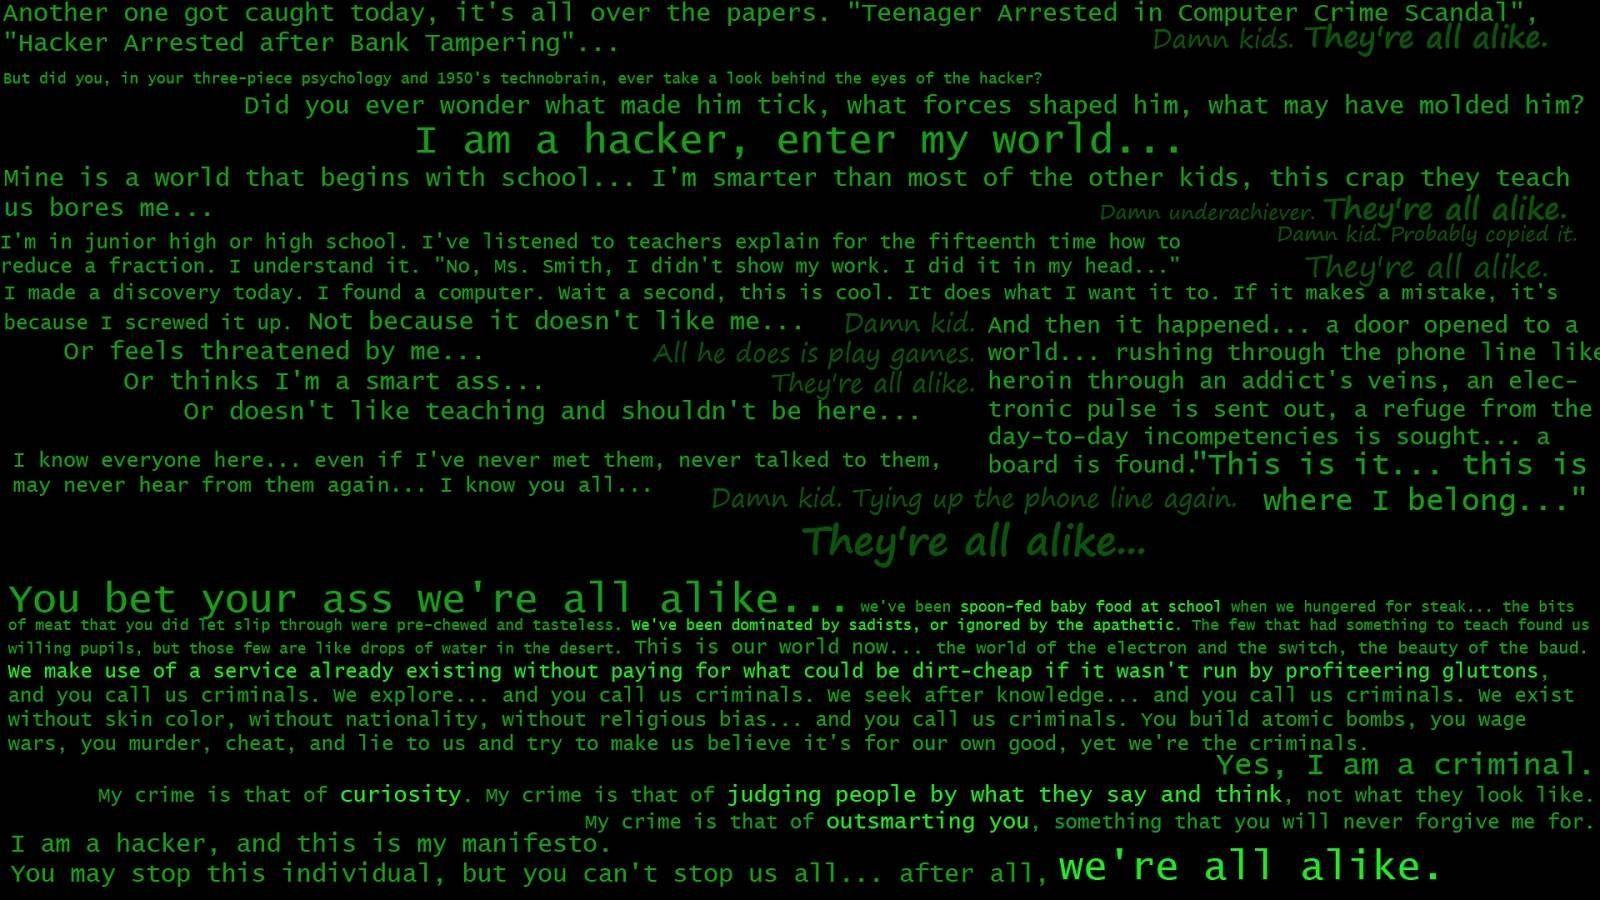 Suggestions Online Image of Hacking Wallpaper 1600×900 Computer